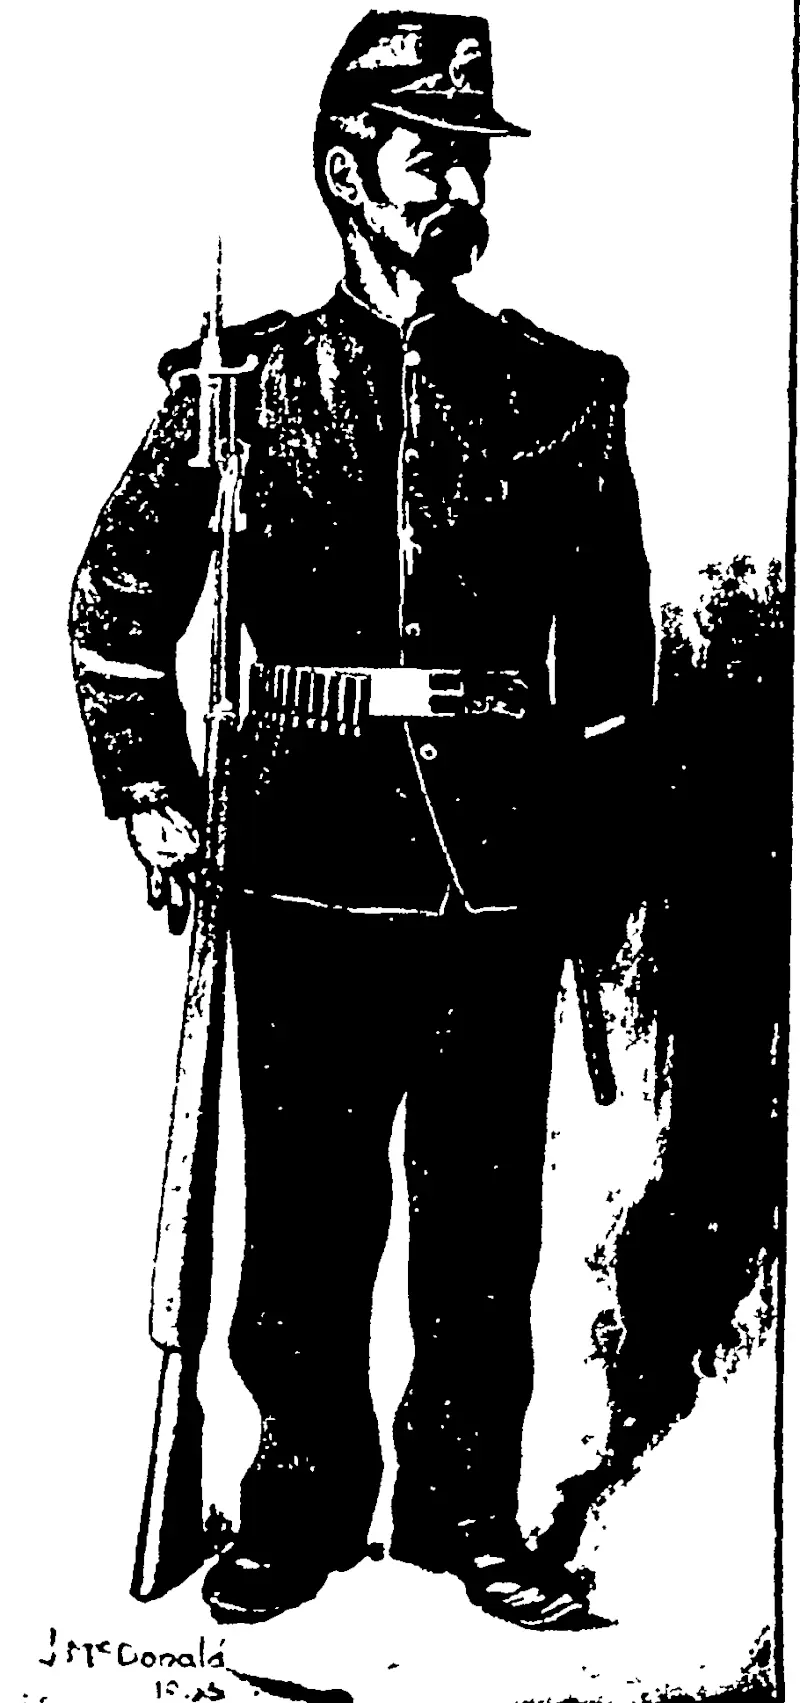 MILITARY TYPE, NO. 1: THE VENEZUELAN SOLDIER.  A member of President Castto's Bodyguard. (Otago Witness, 28 January 1903)